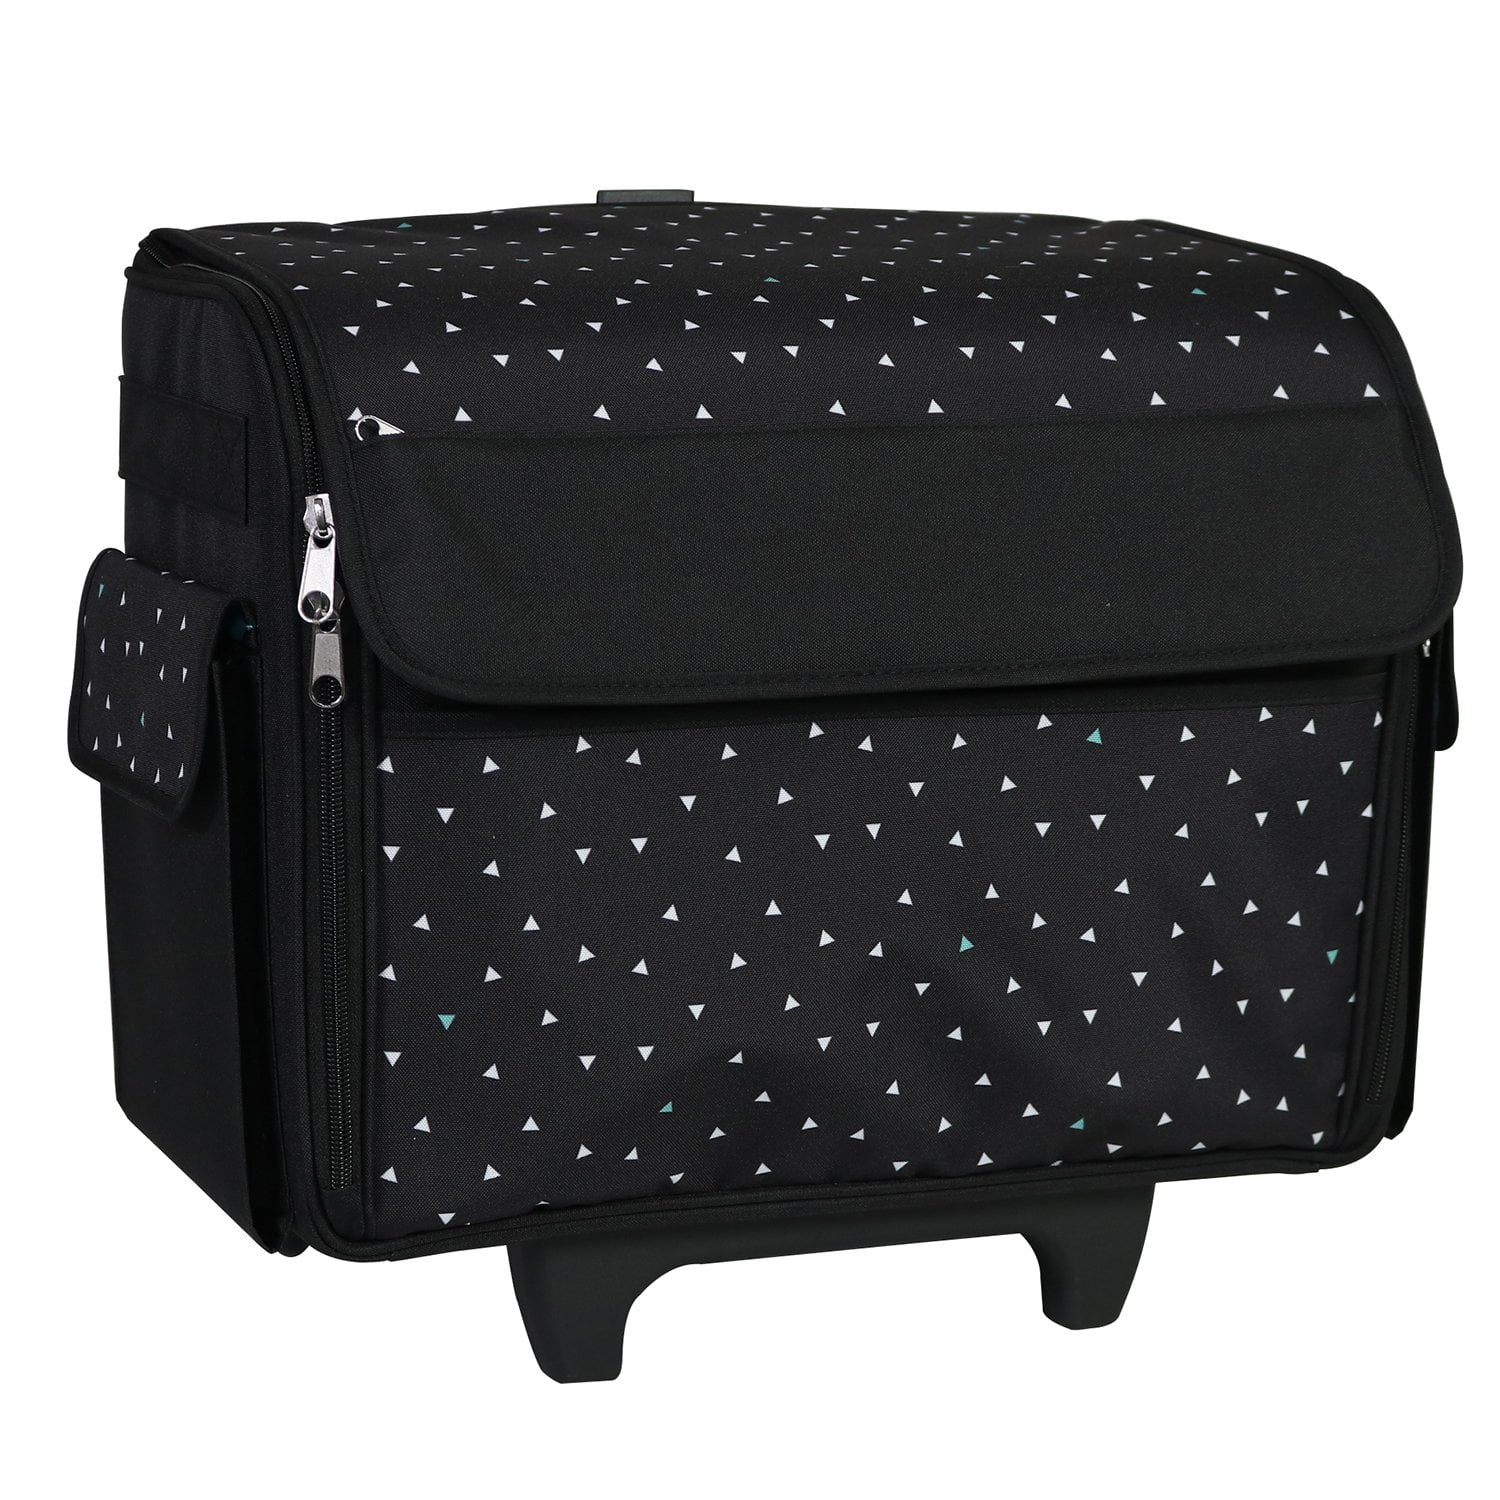 Everything Mary Rolling Sewing Machine Tote - Black & White 812259043840